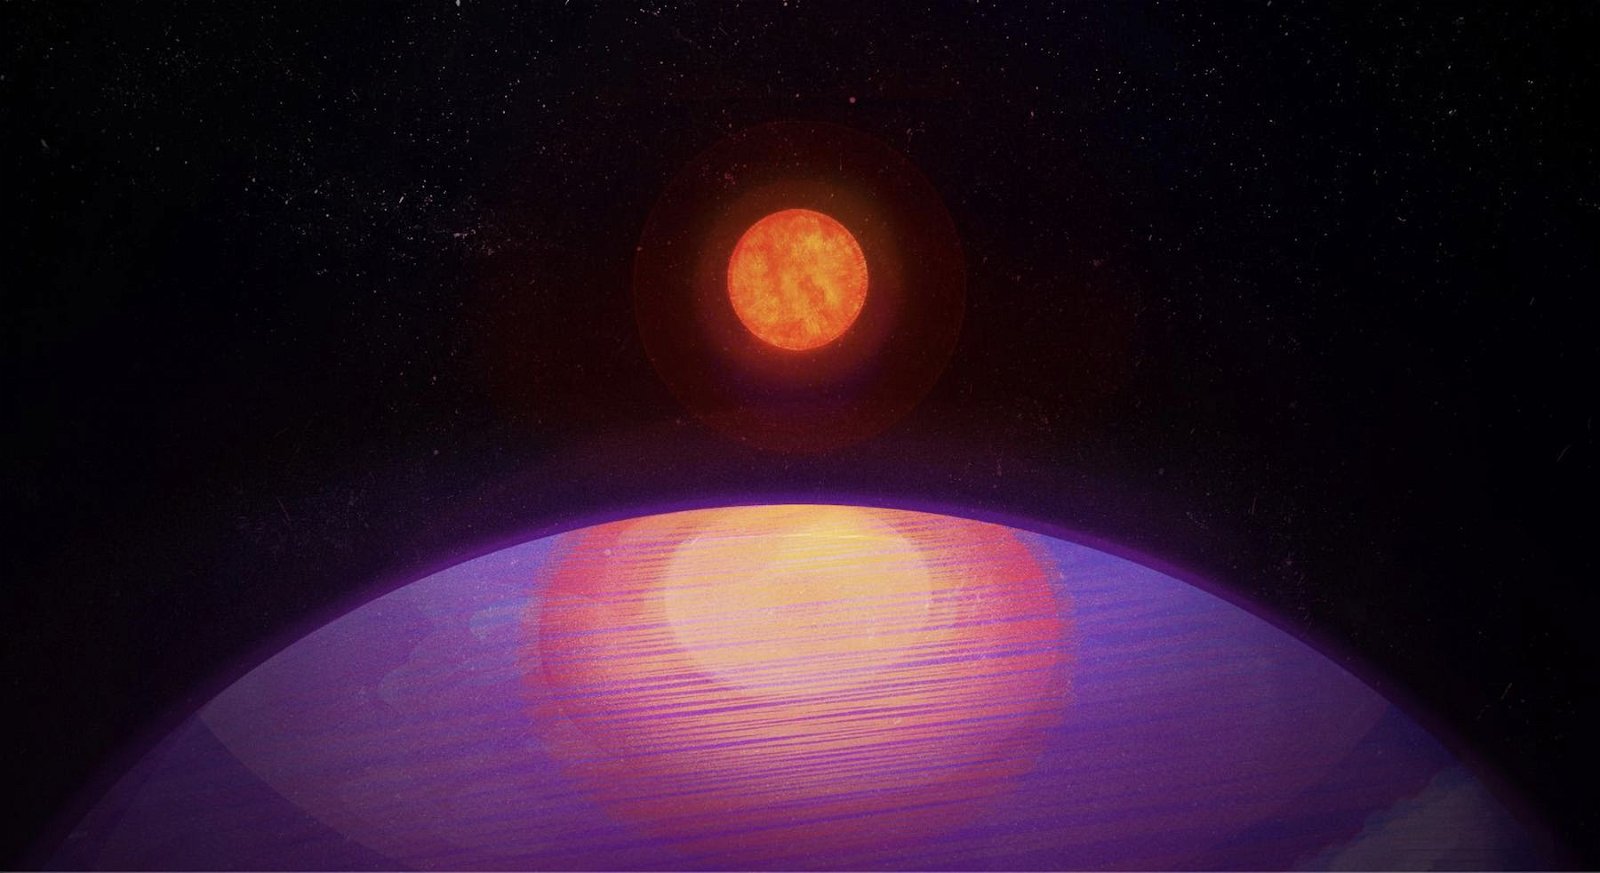 Astronomers have discovered a celestial body that is “too big to exist”, upending previous theories about planetary formation